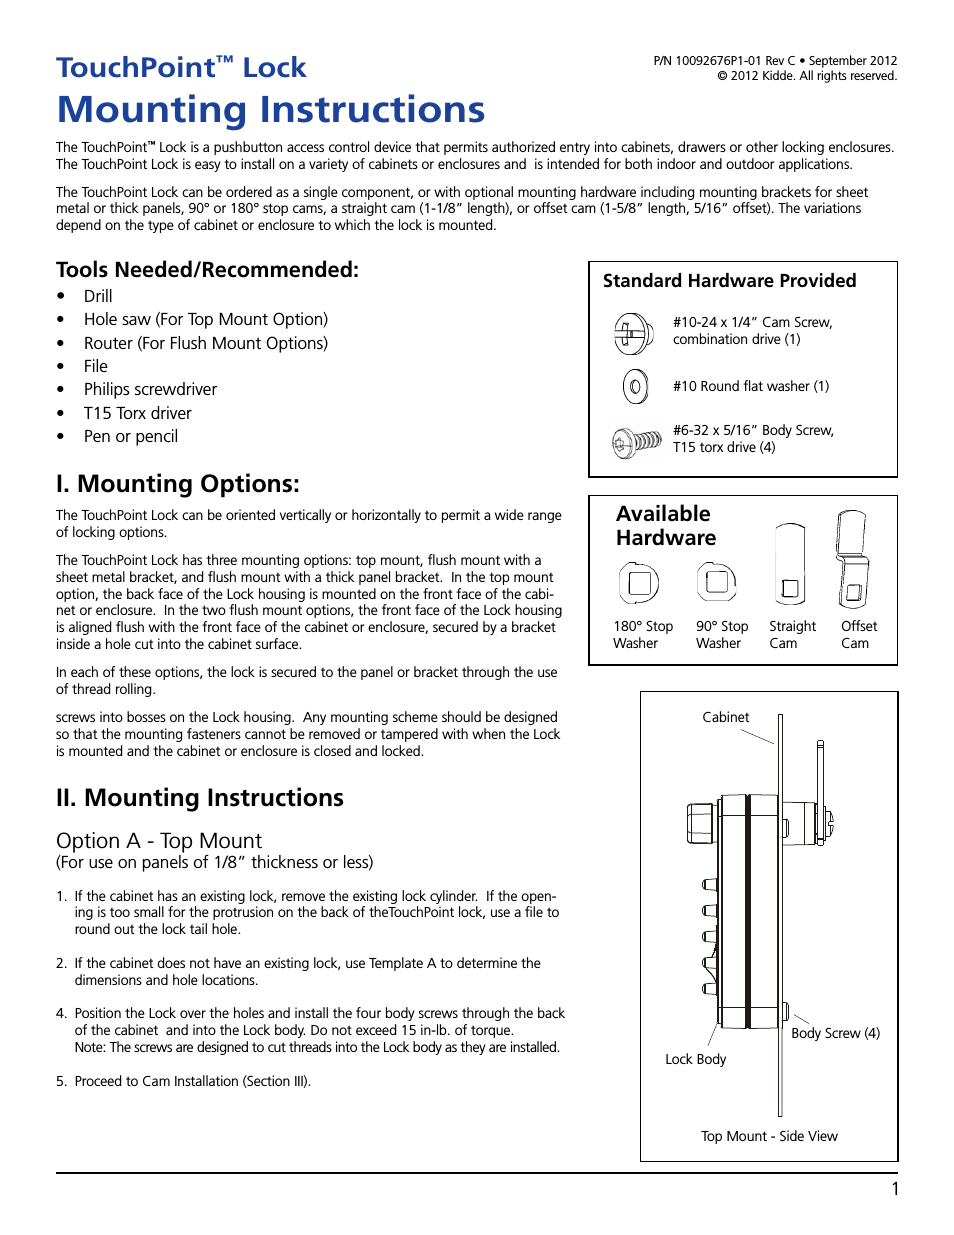 TouchPoint Lock Mounting Instructions